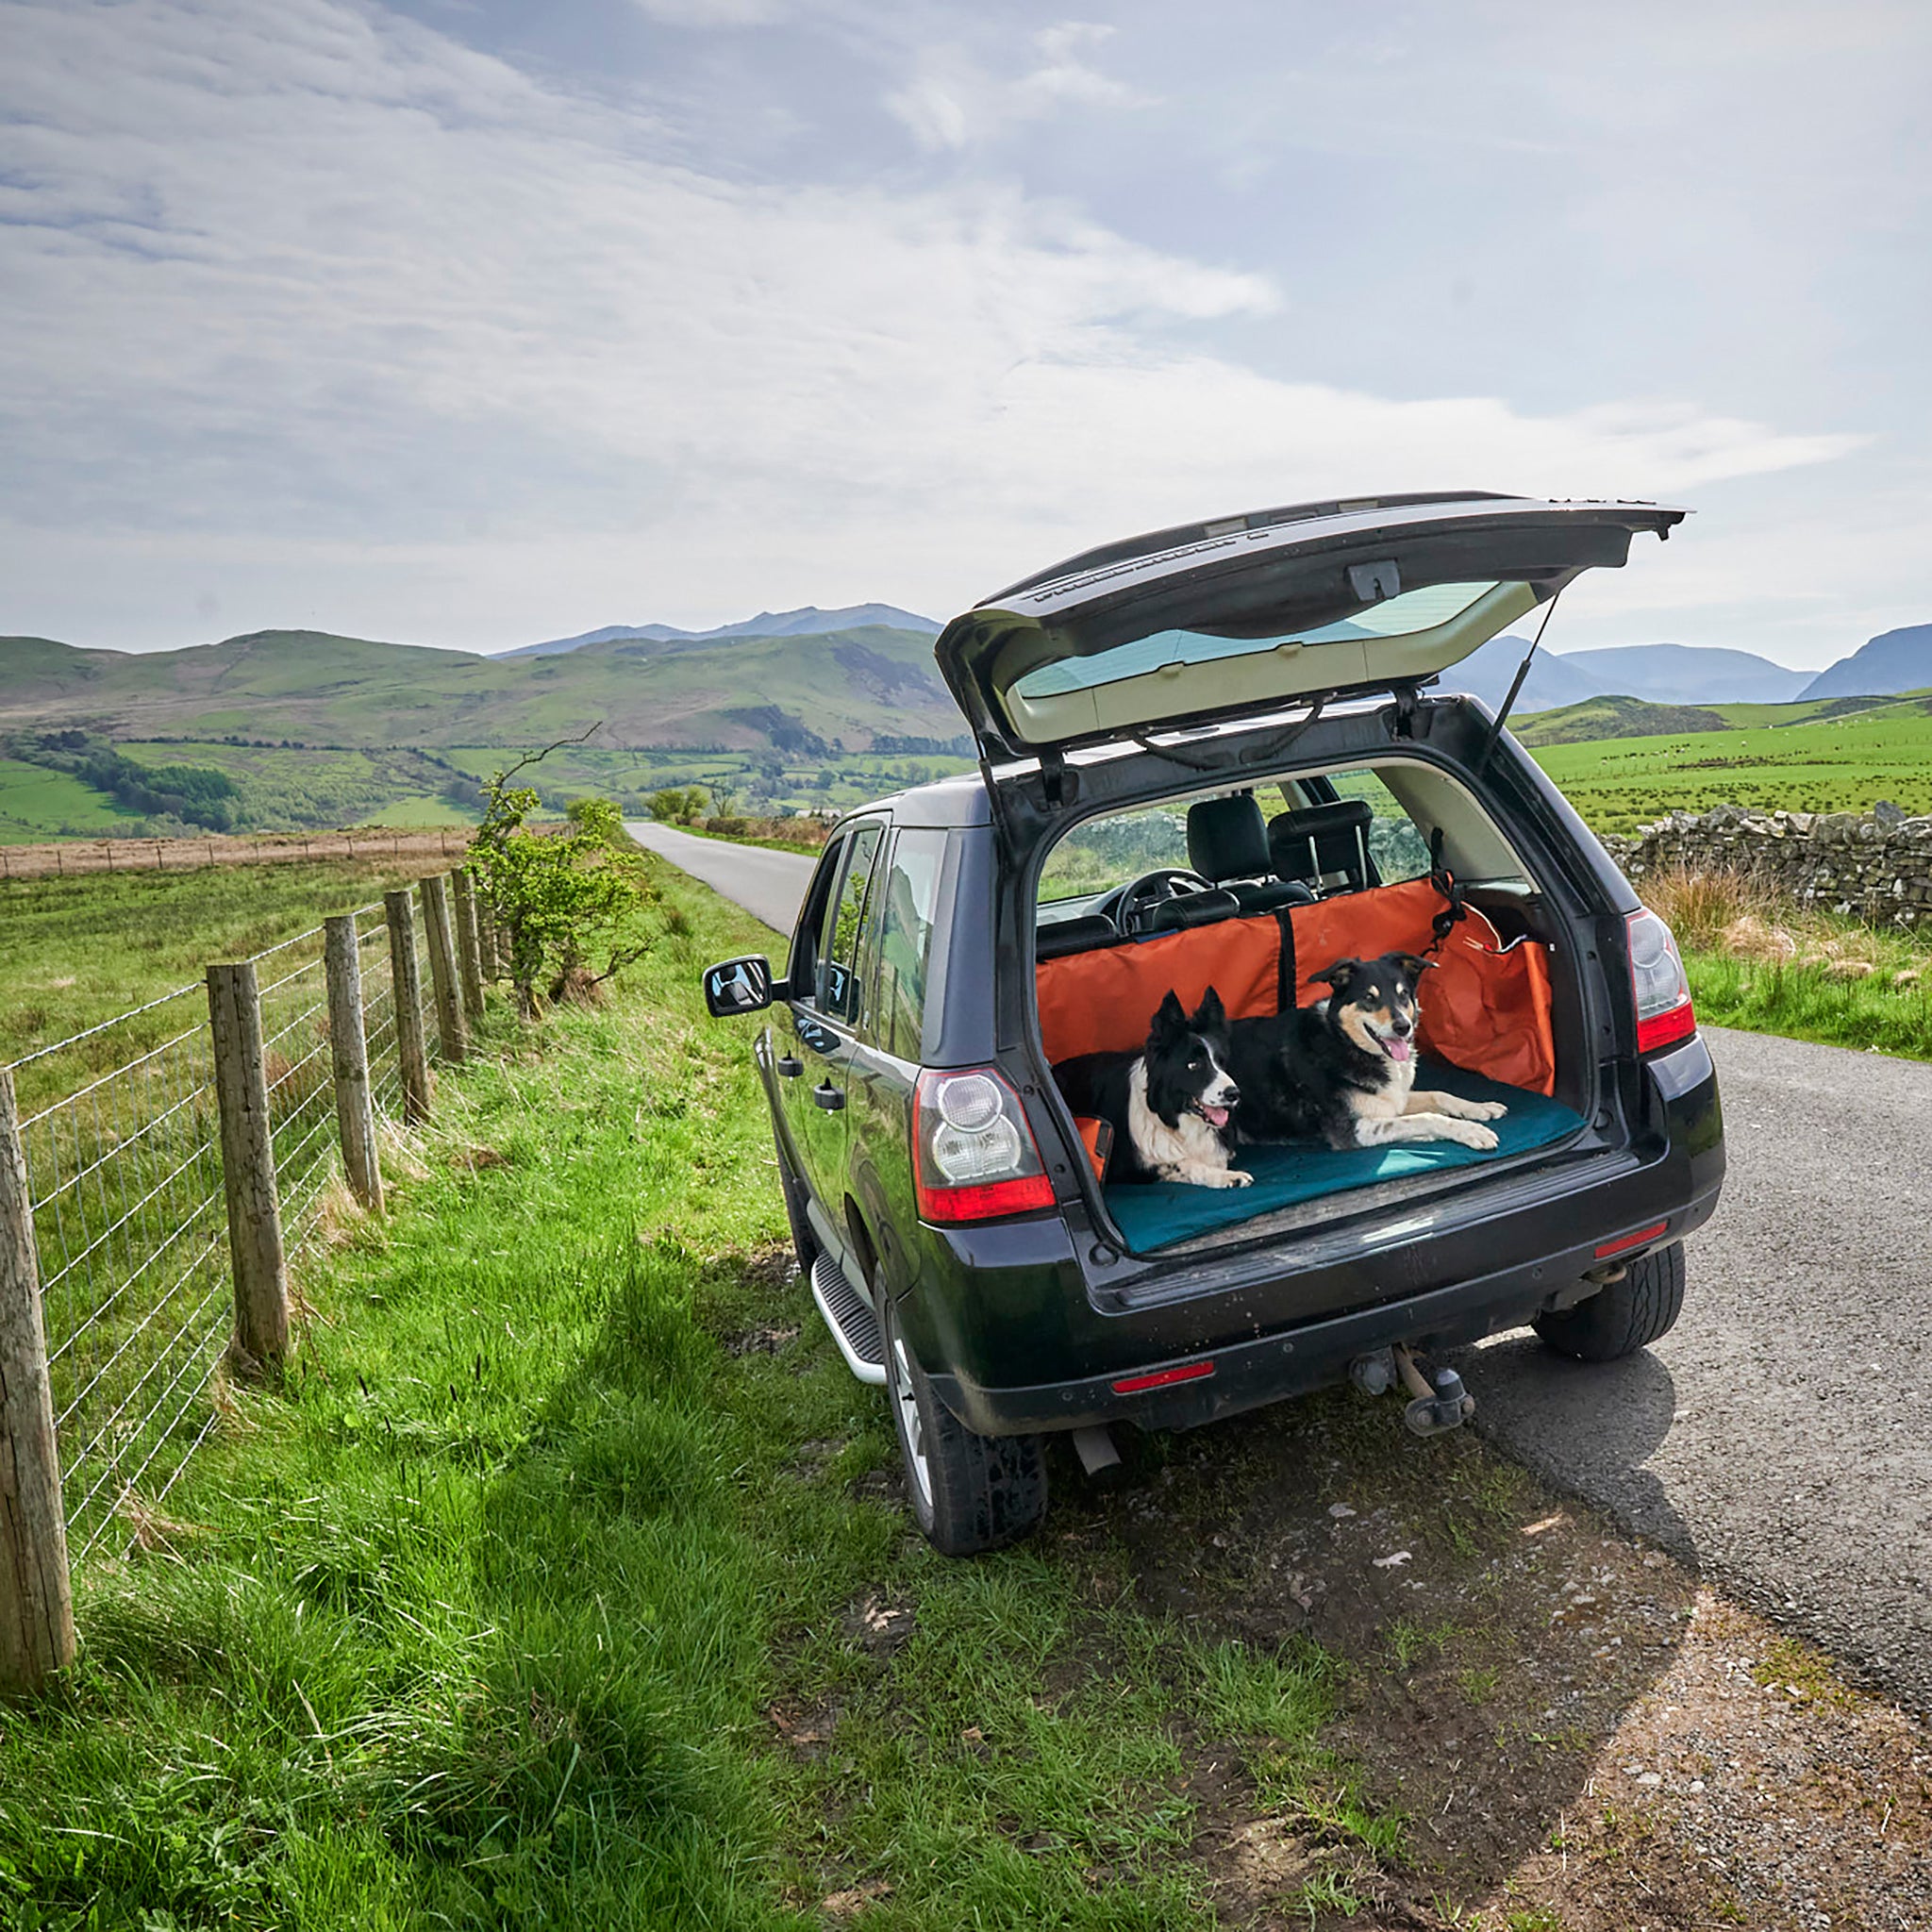 Two border collies, one black and white and the other tricolour sit upon a blue Chimney Sheep woollen flat rollup travel dog bed in the boot of a car